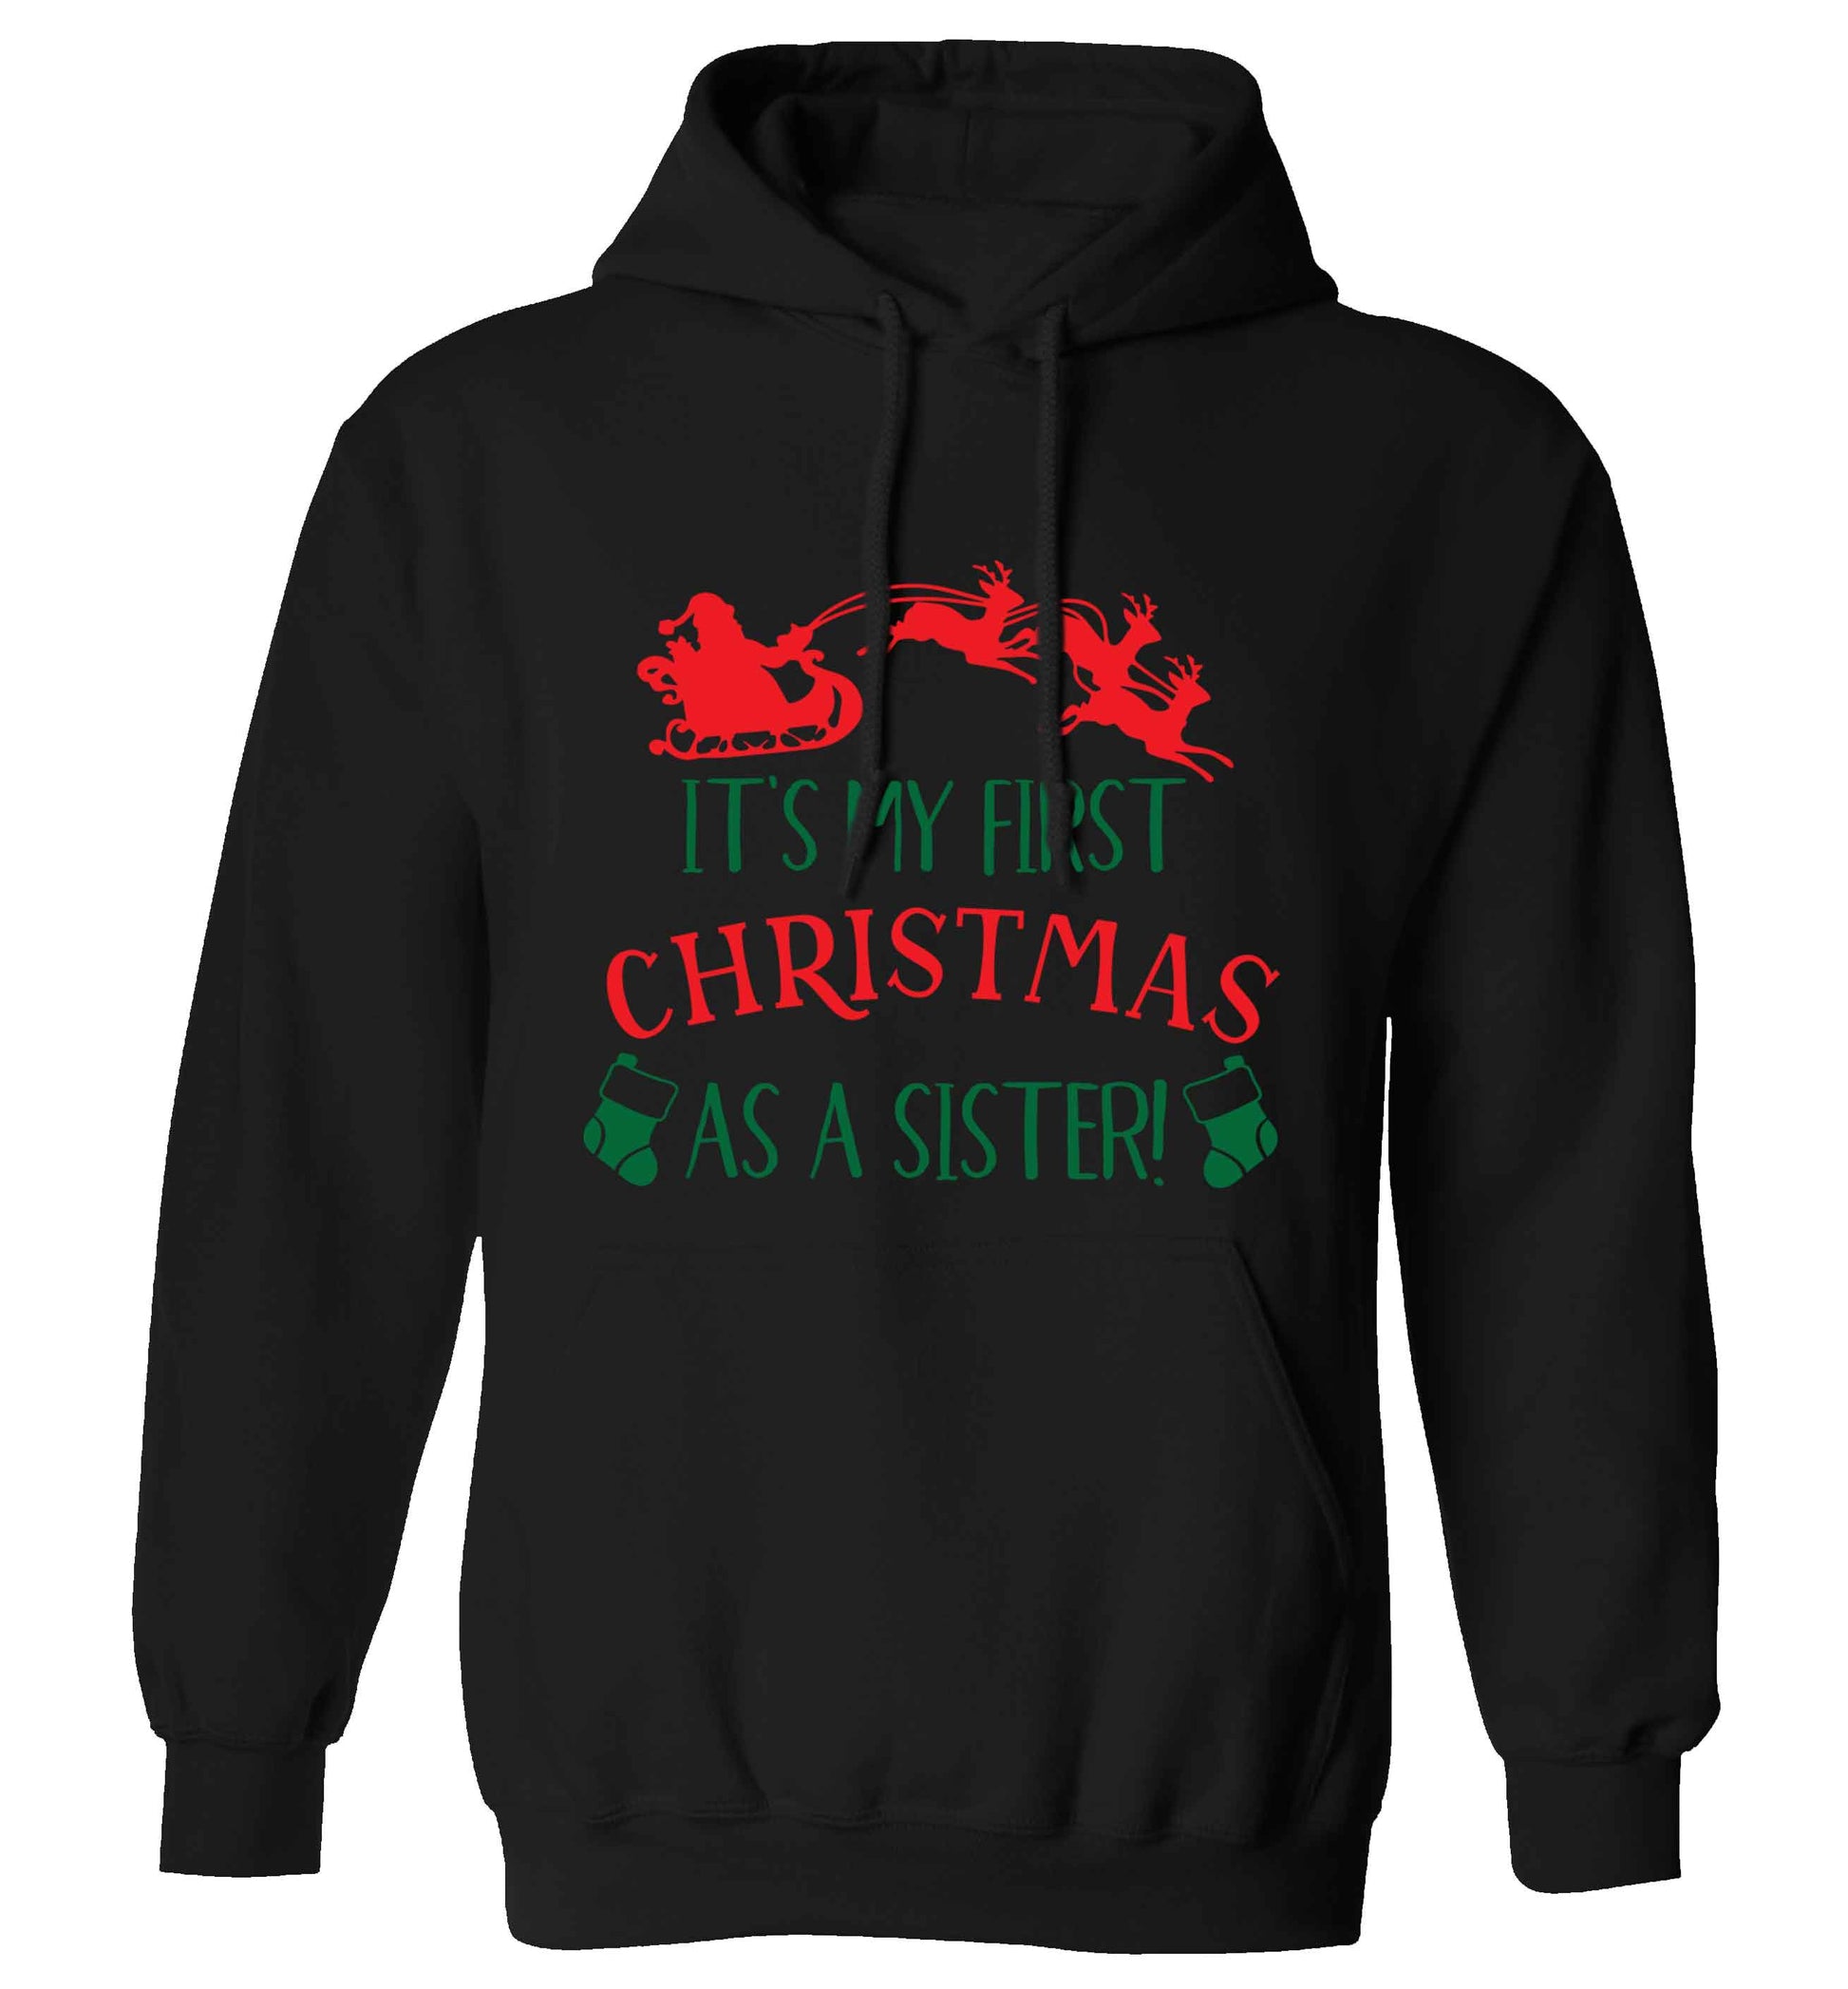 It's my first Christmas as a sister! adults unisex black hoodie 2XL